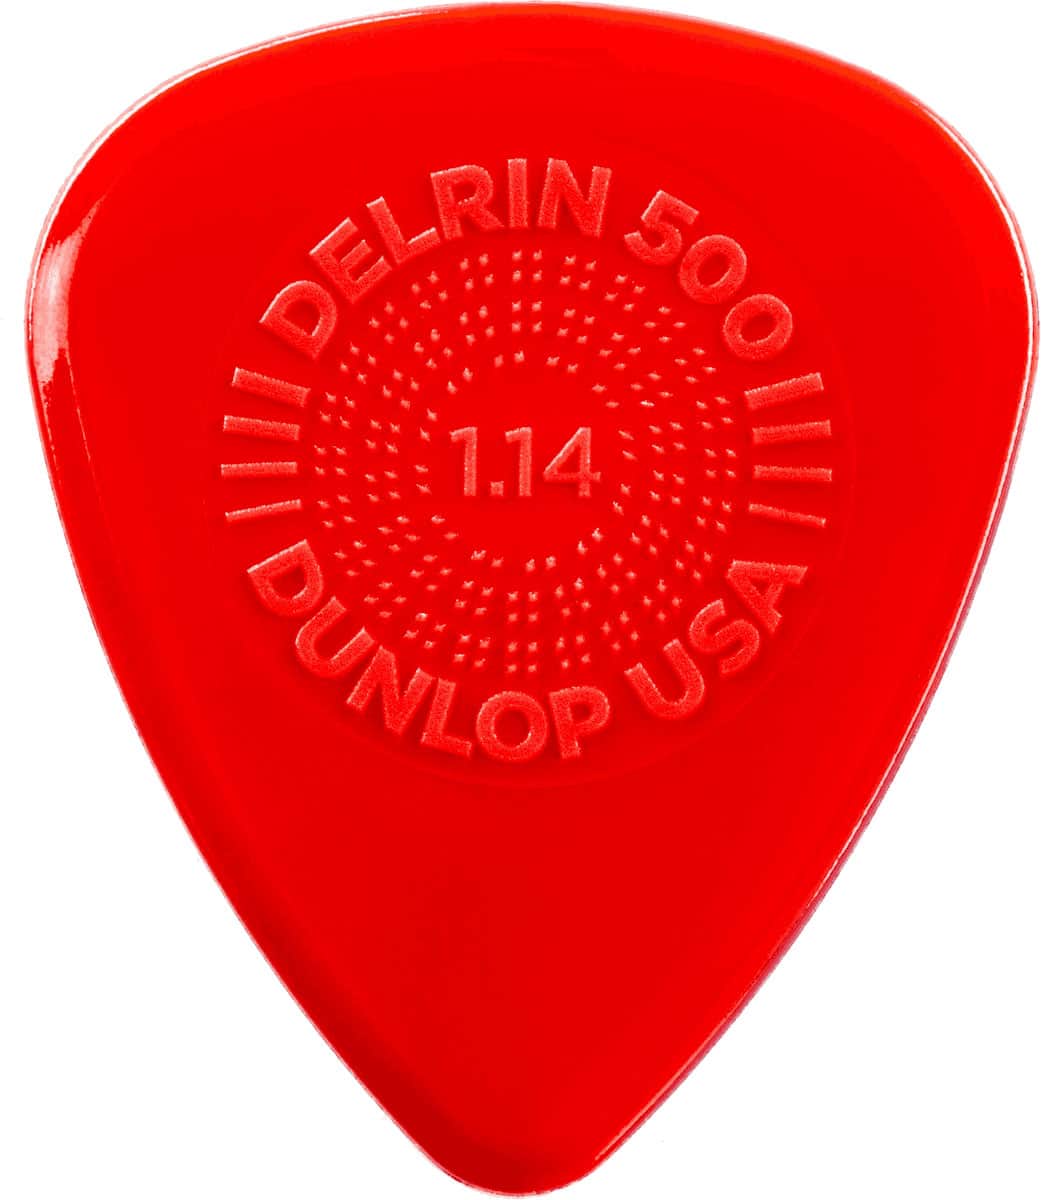 JIM DUNLOP SPECIALTY DELRIN 500 PRIME GRIP 1,14MM X 12